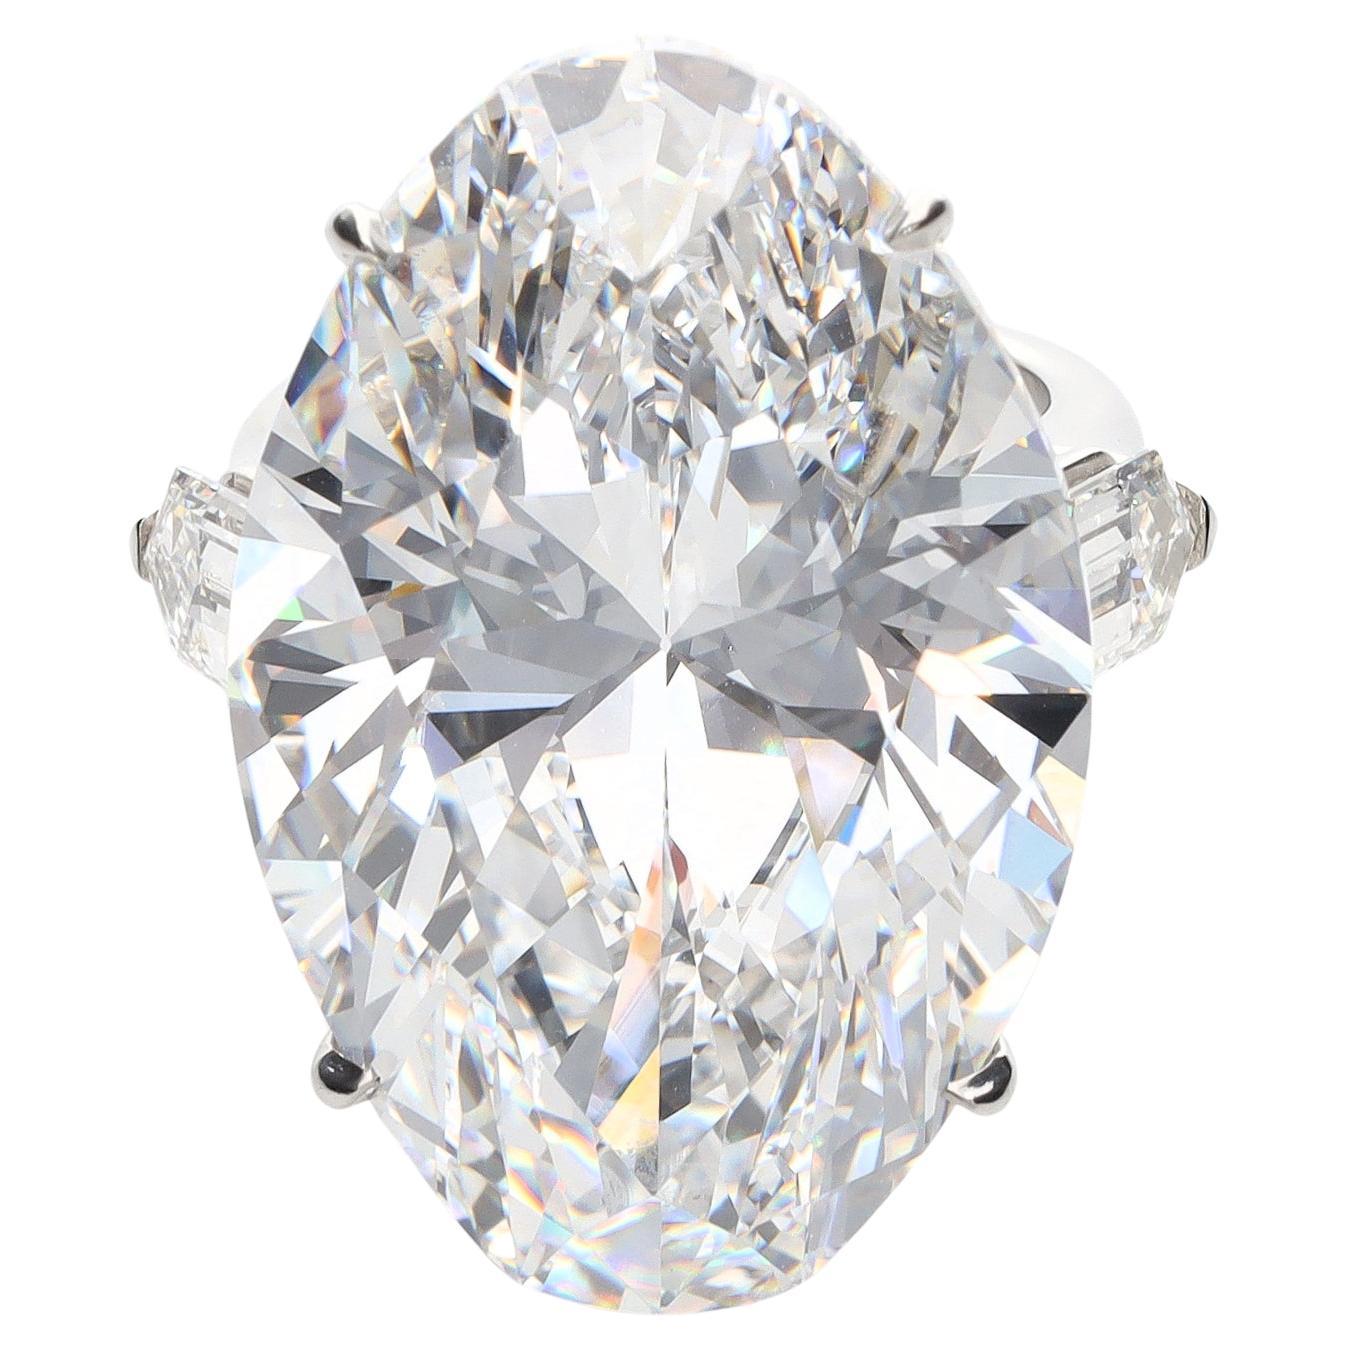 Highly Important 43.19 Carat D Flawless Type II A Oval Diamond Ring

Accompanied by a supplemental letter stating that the diamond has been determined to be a Type IIa diamond. Type IIa diamonds are the most chemically pure type of diamond and often